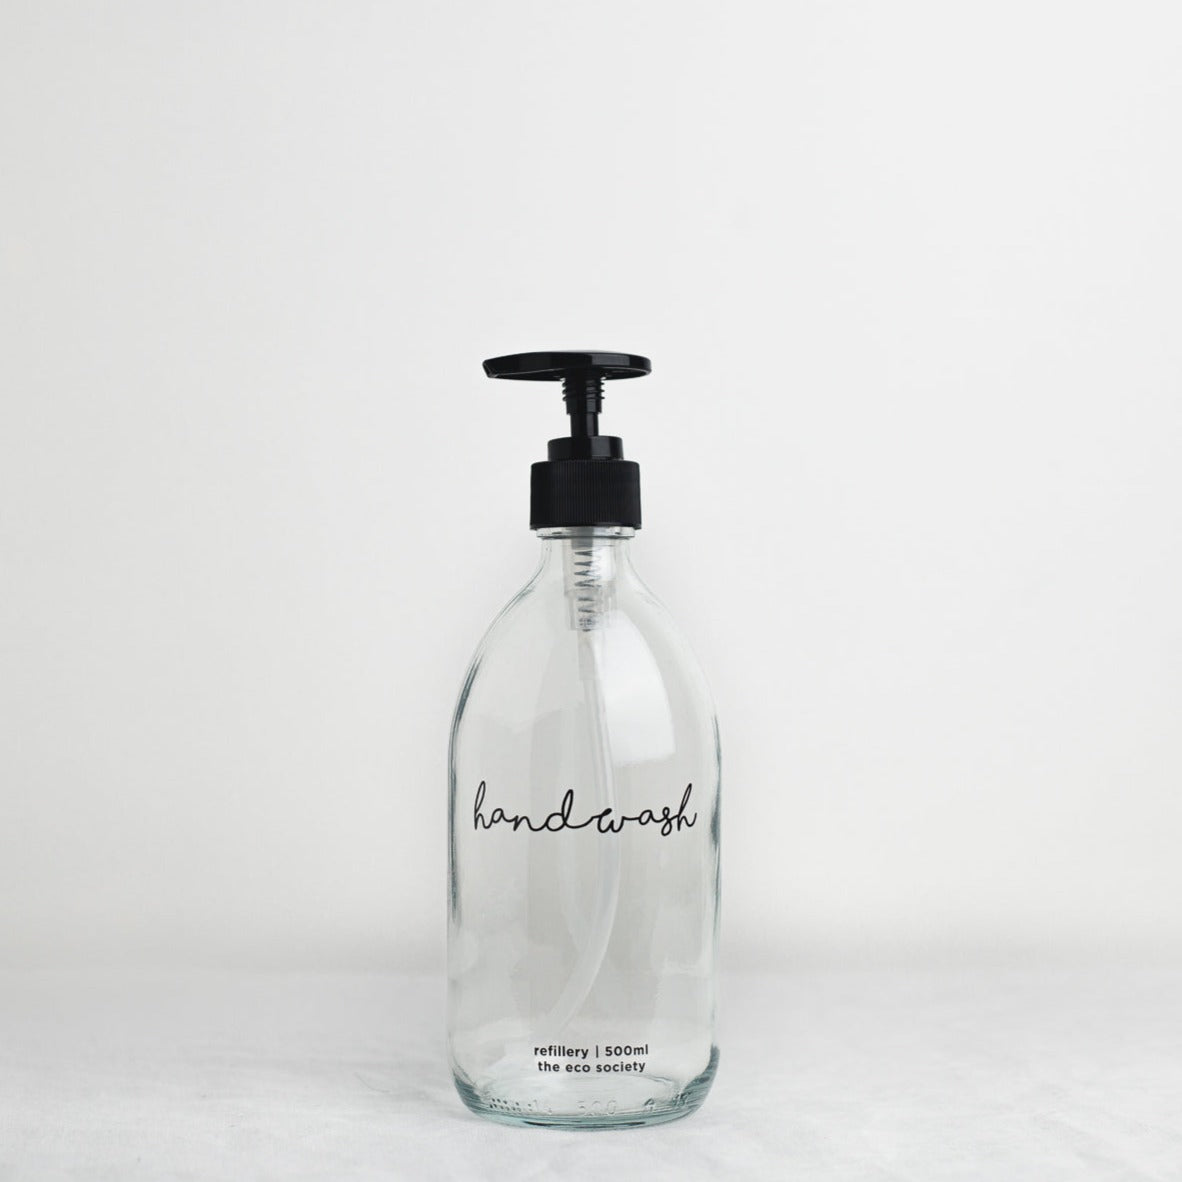 Clear Glass Bottle with Black printed text "Handwash" 500ml Refillery Bottle 